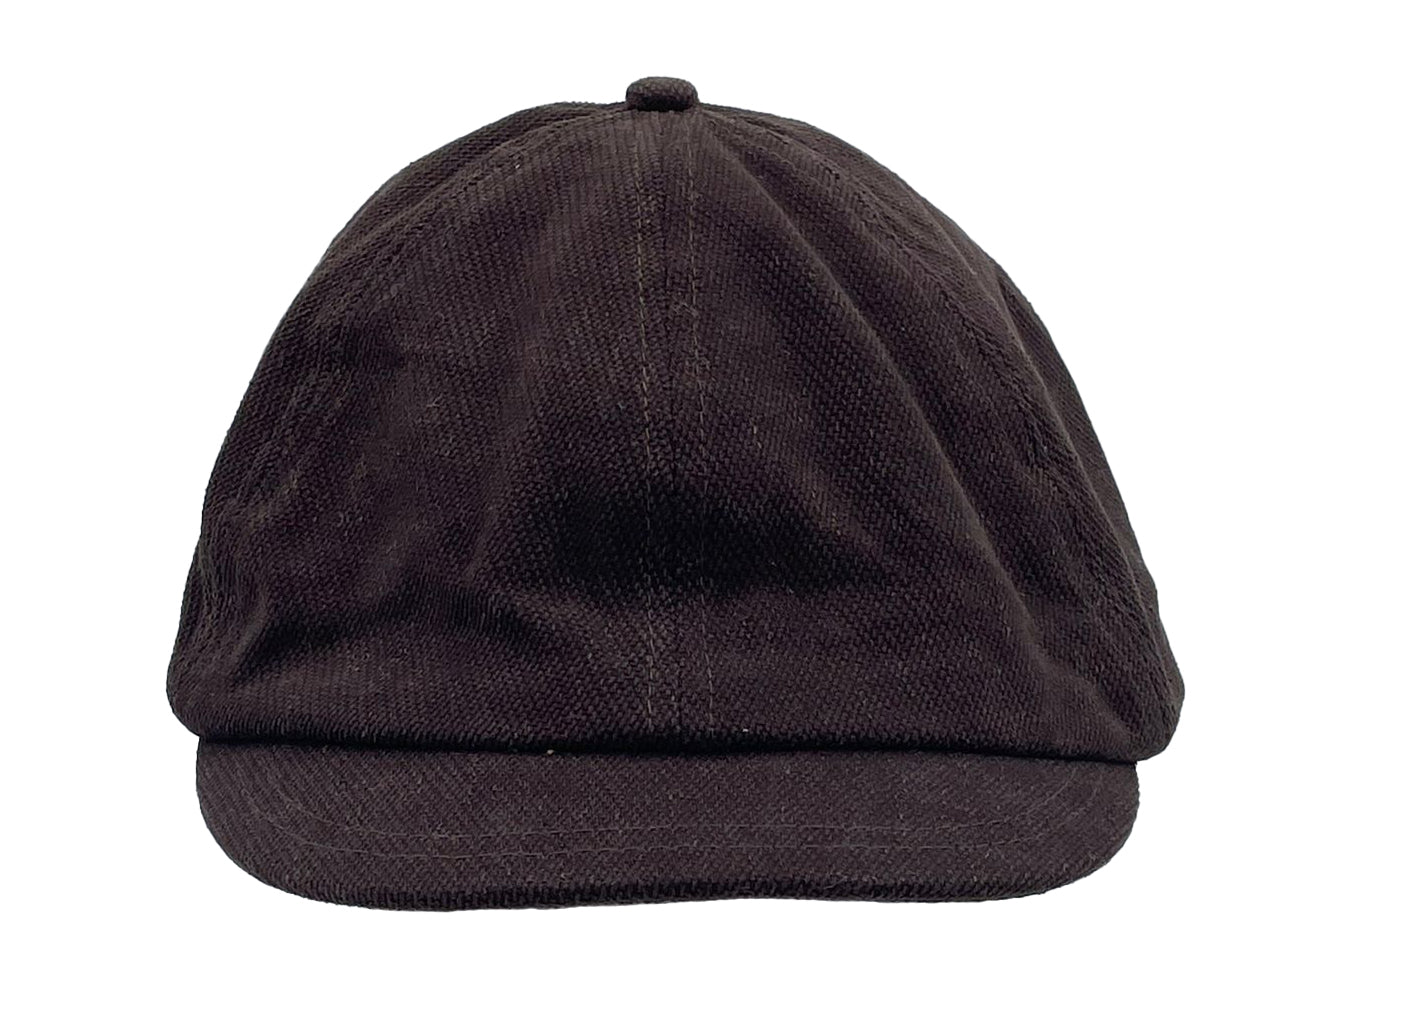 Ultra -light slide hat with elastic band | Men's Cappi made of soft twill